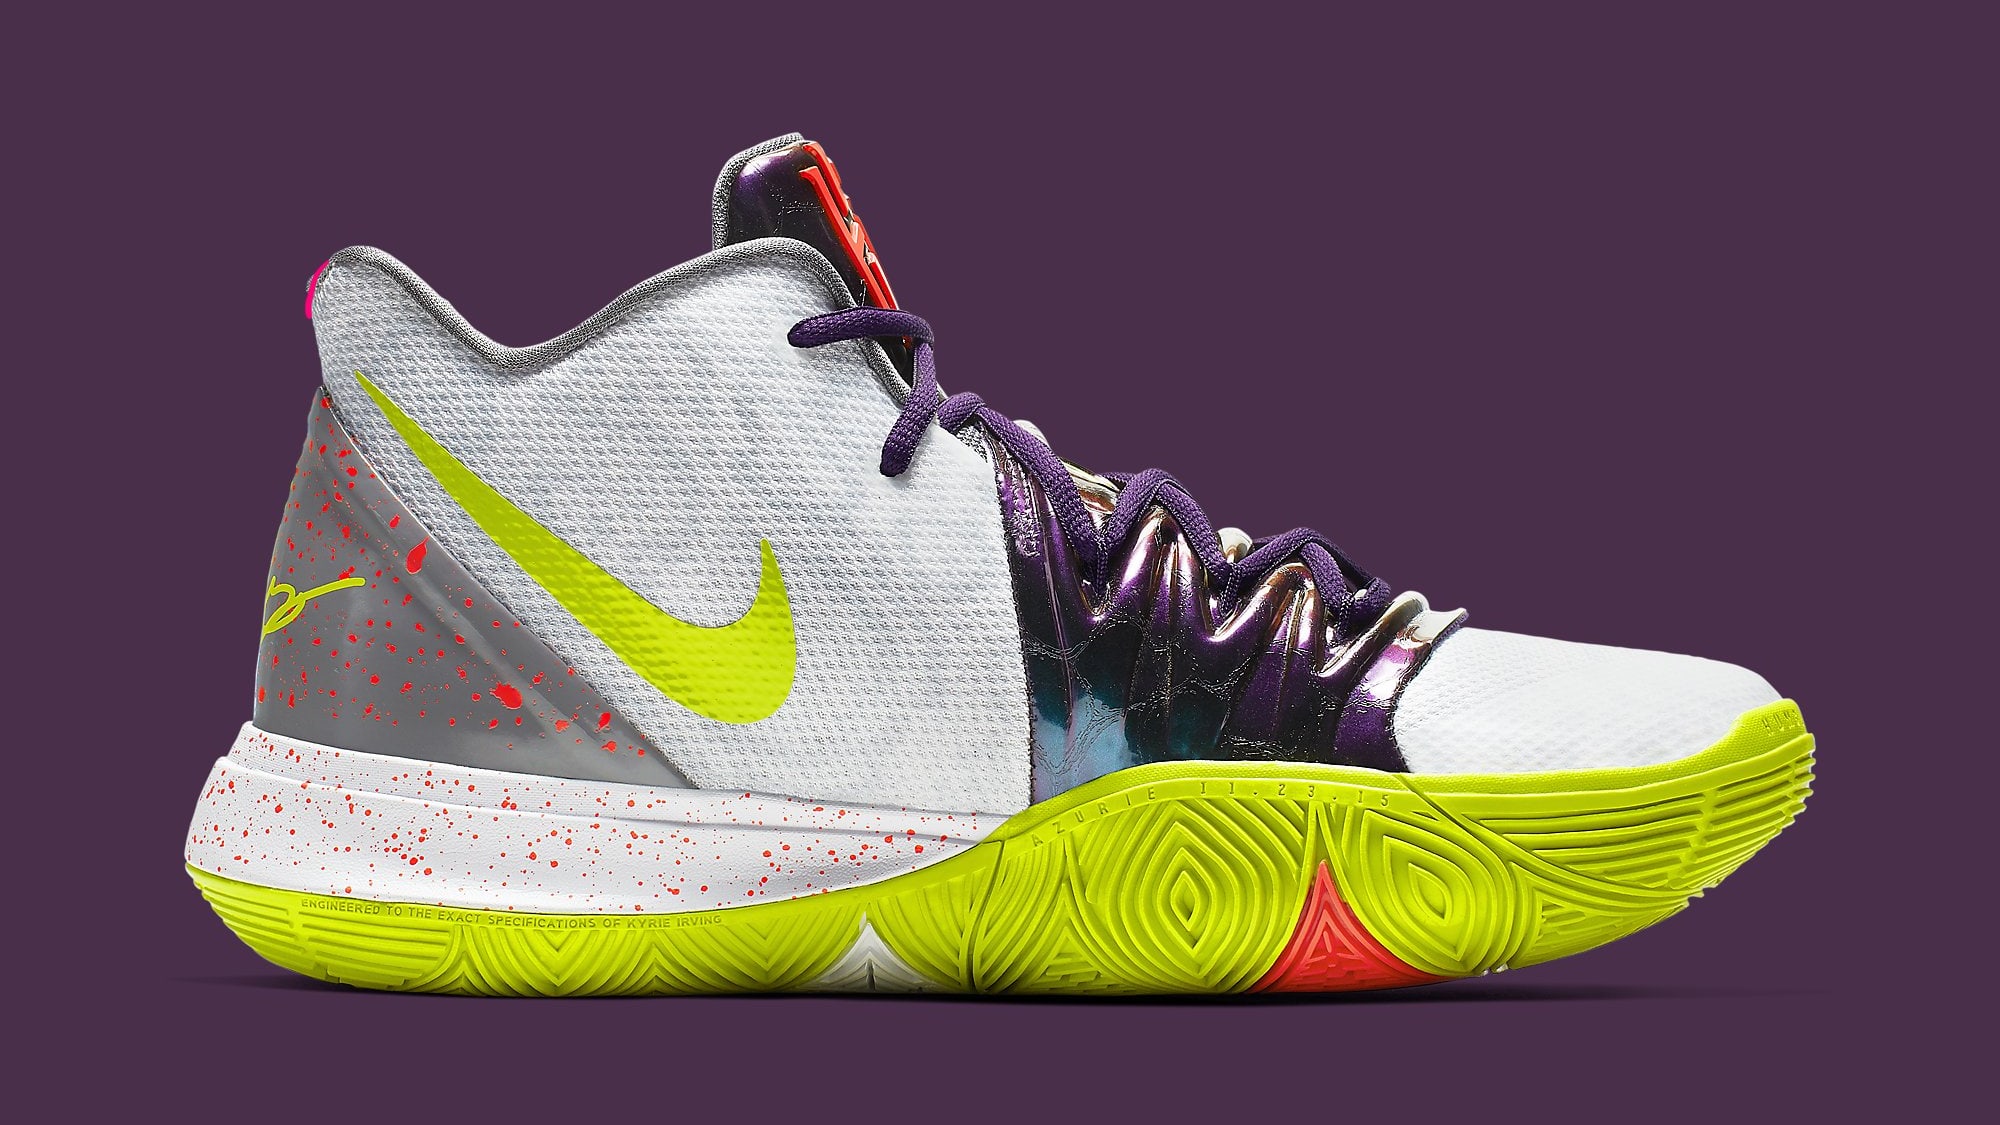 Nike Kyrie 5 Chaos Mamba Mentality Release Date AO2918-102 Medial